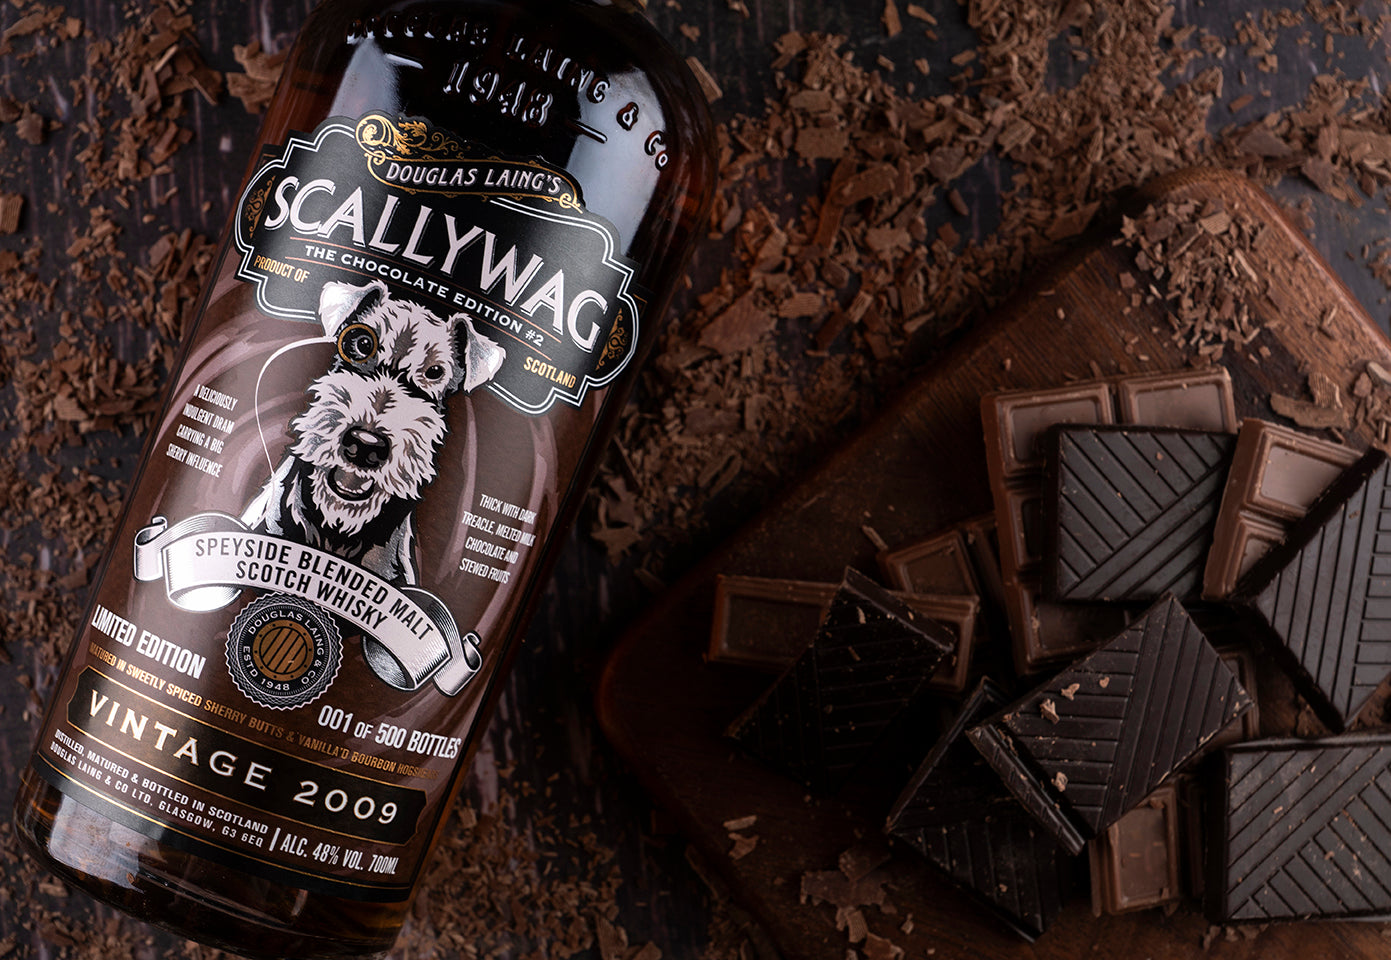 Douglas Laing launches Scallywag Chocolate Edition No.2 